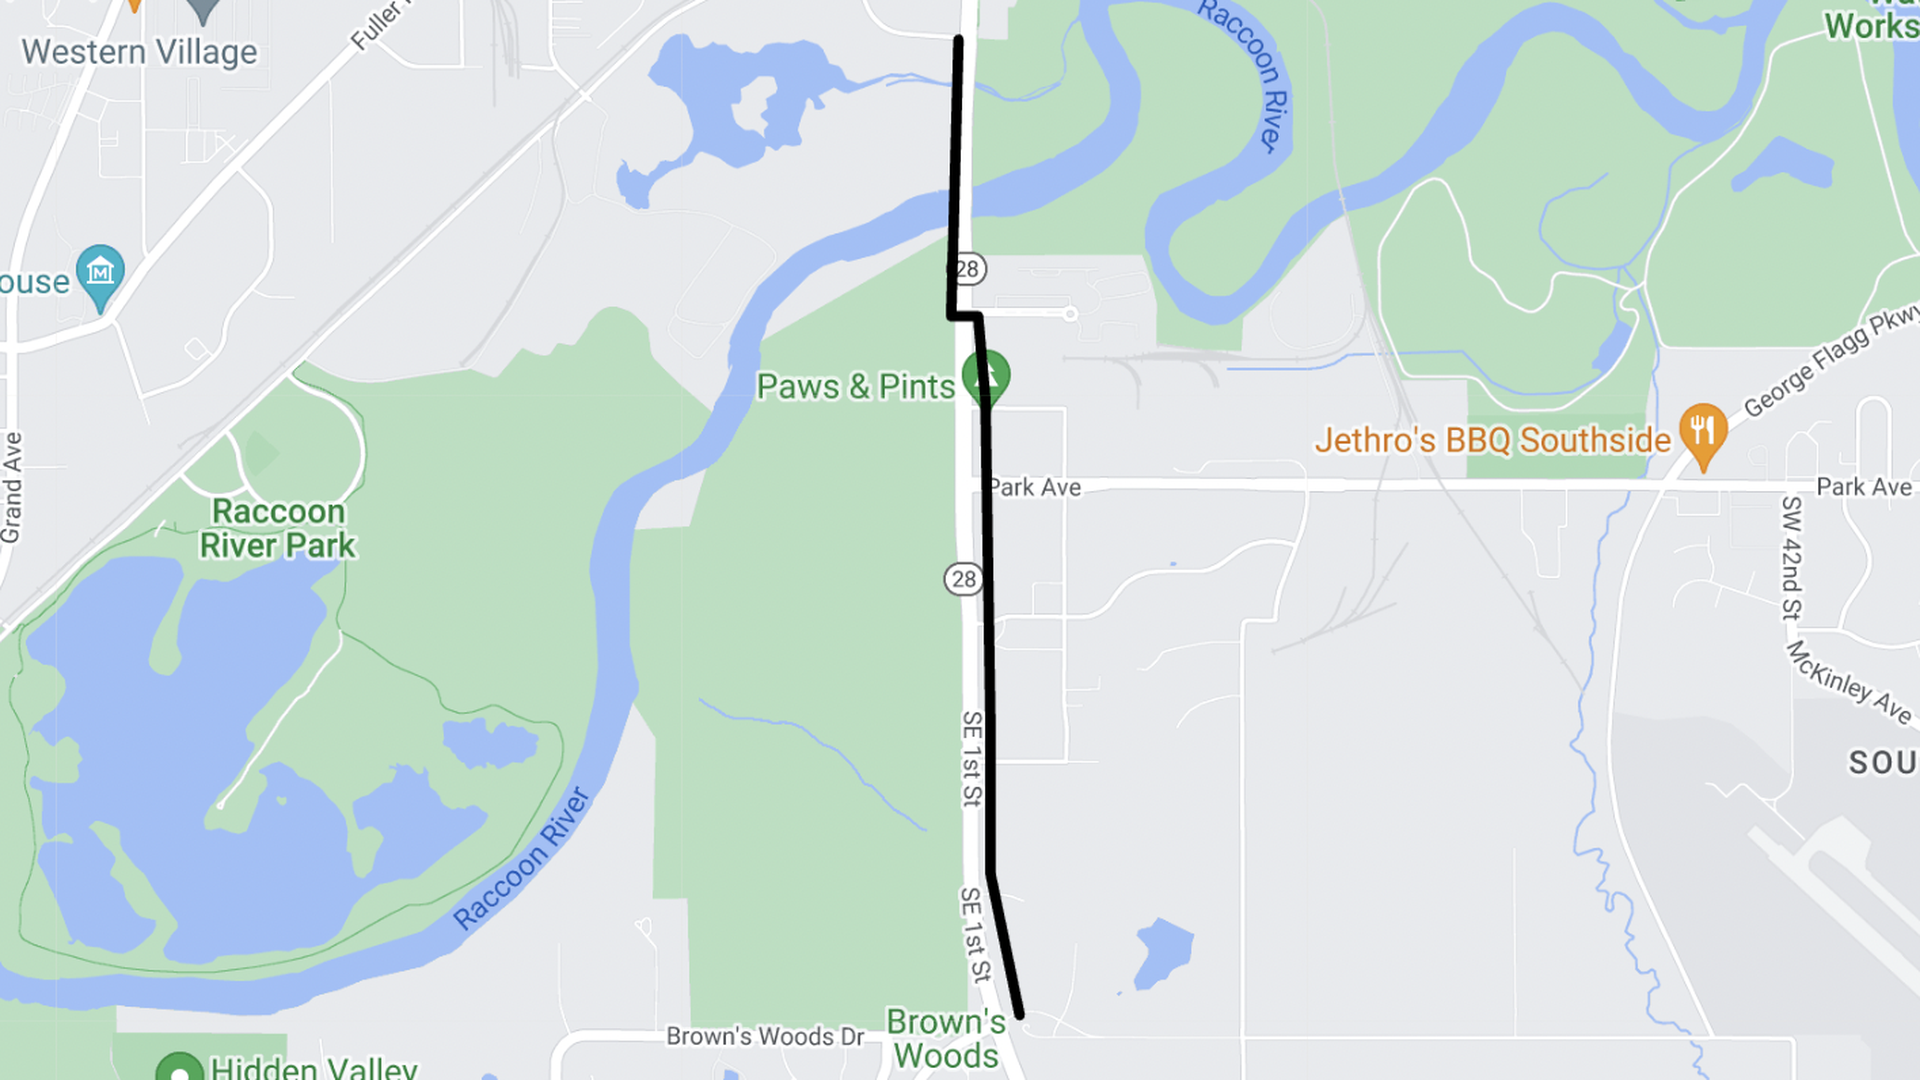 A google map showing the bike trail